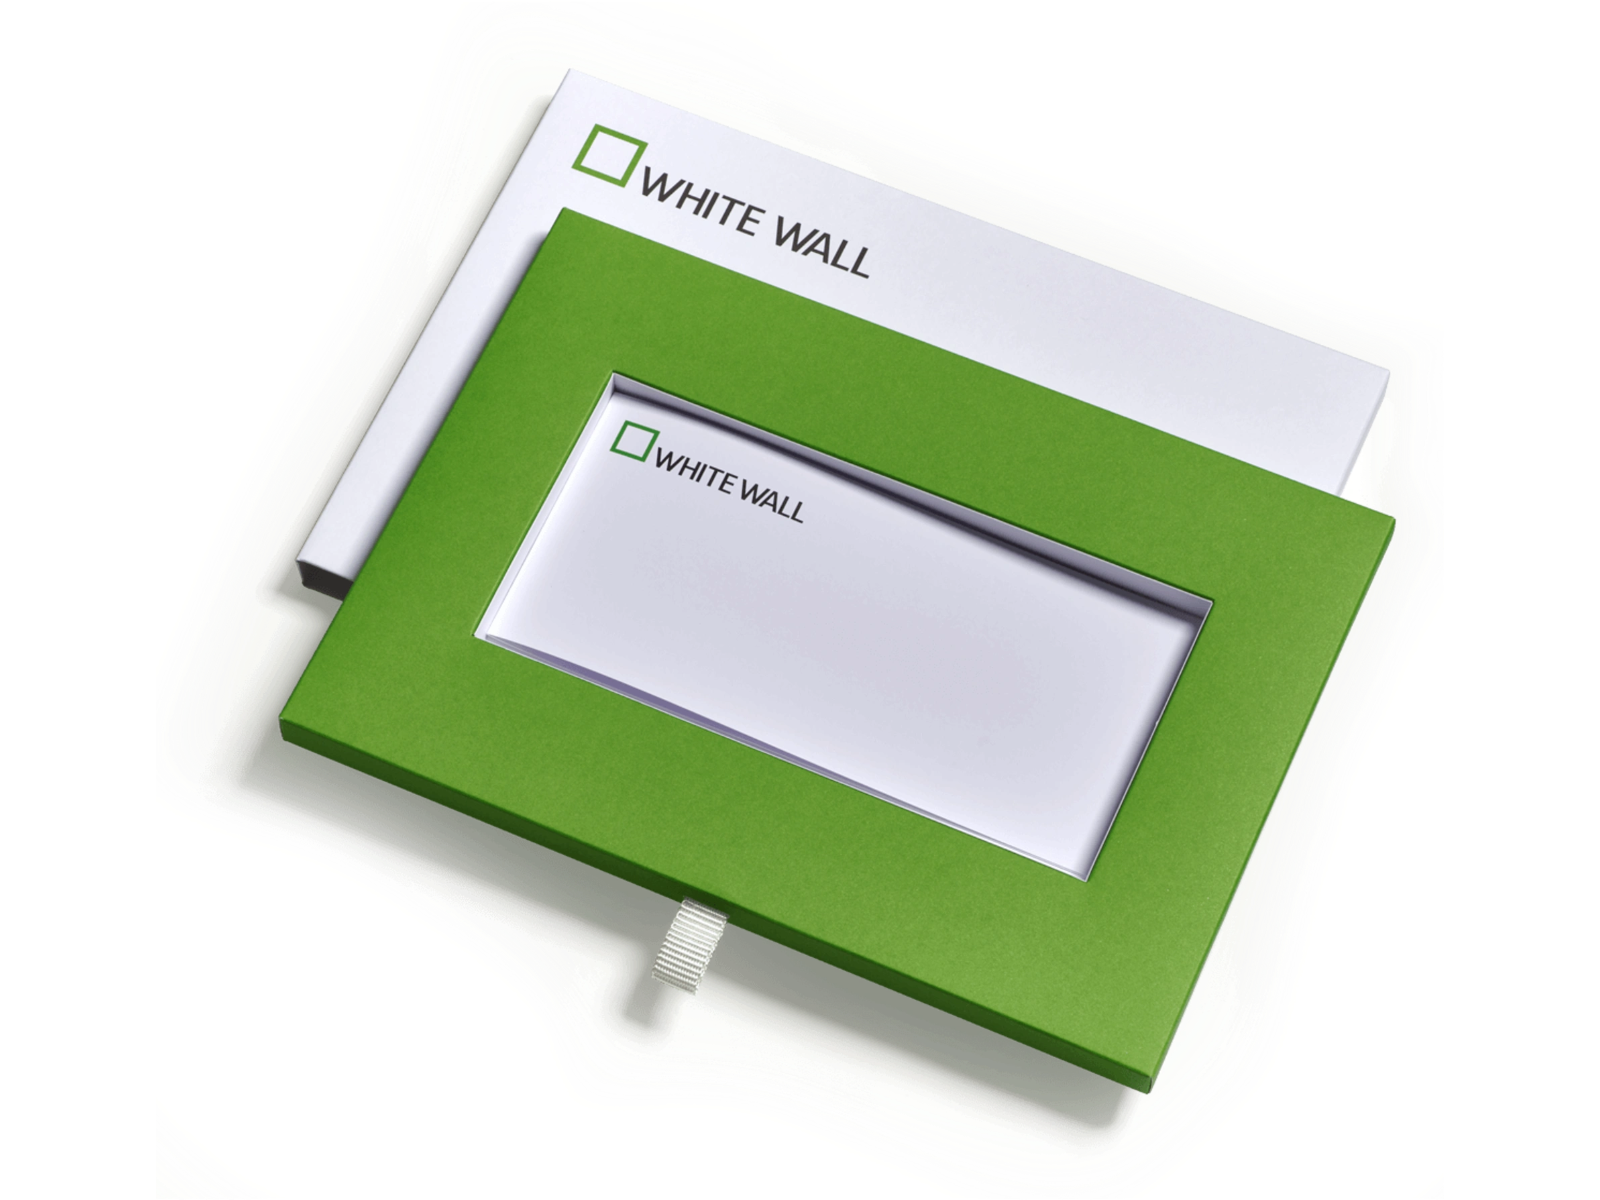 whitewall gift certificate in a green envelope.